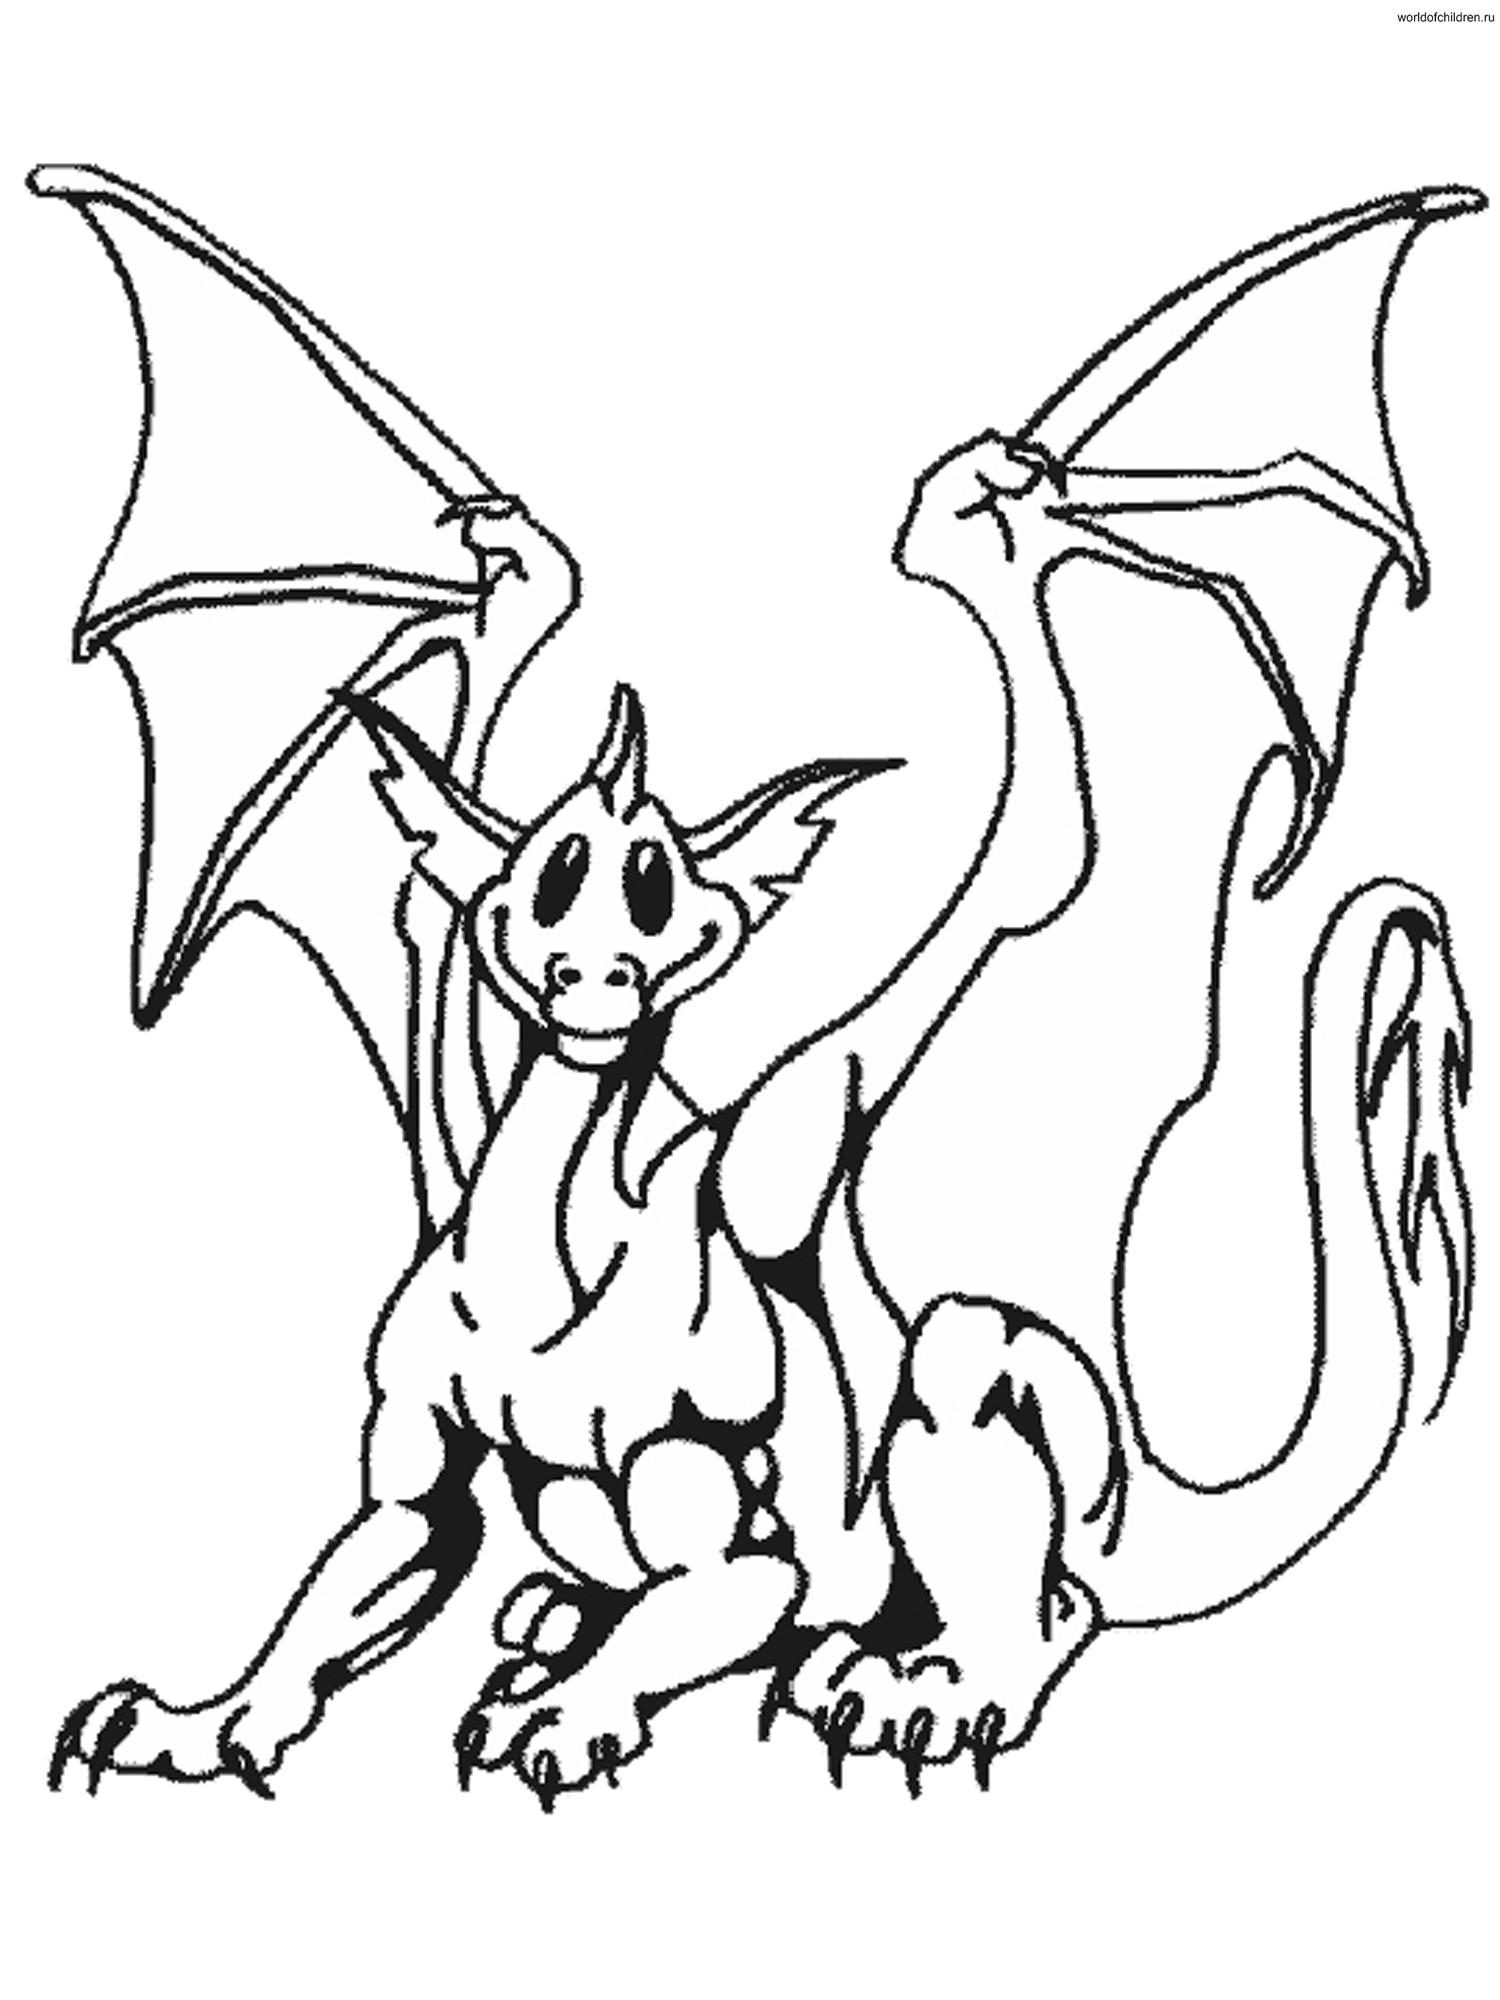 Coloring page: Dragon (Characters) #148414 - Printable coloring pages